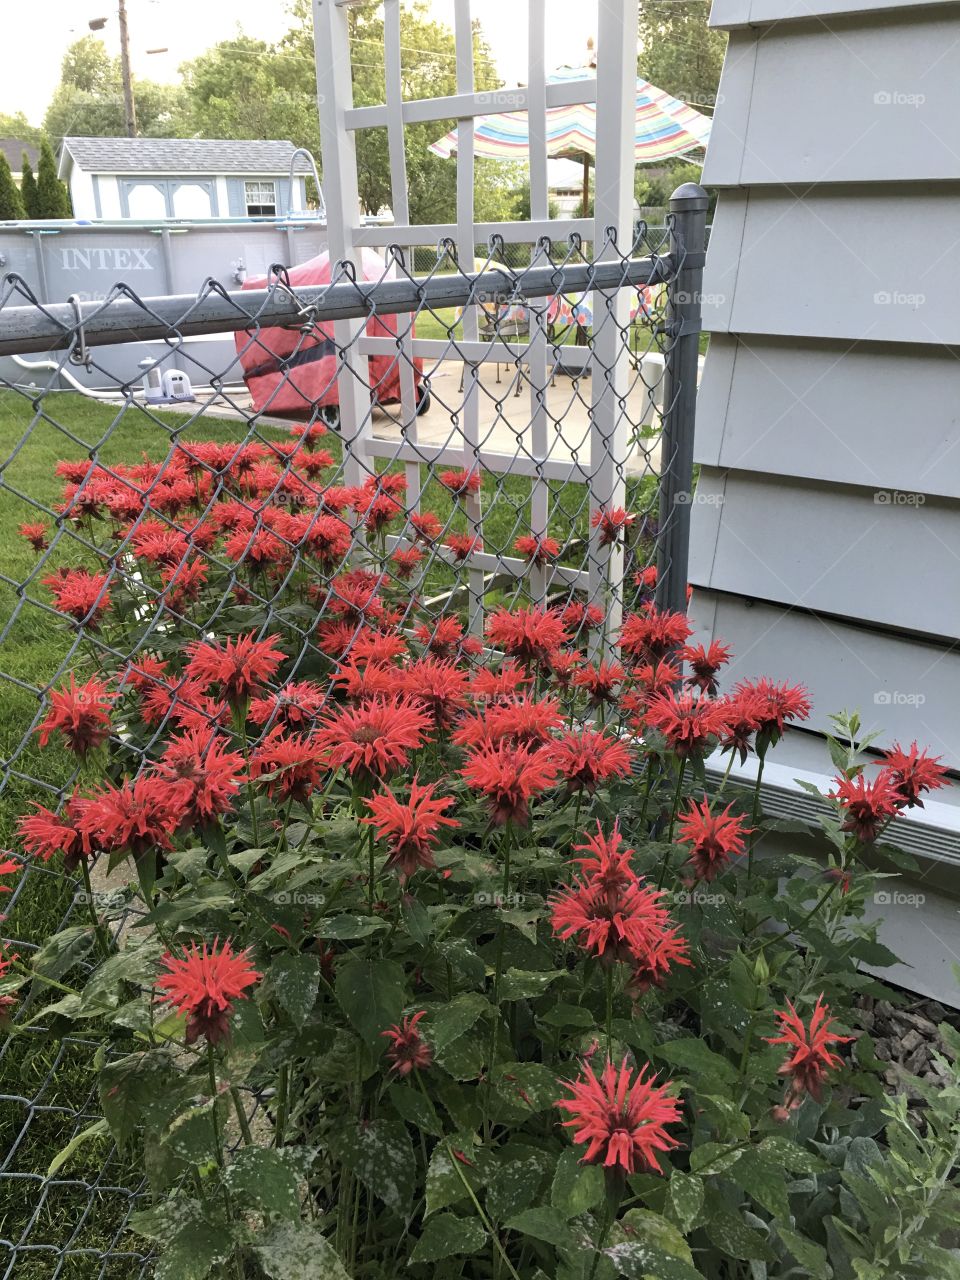 Red beebalm flowers in bloom against fence 